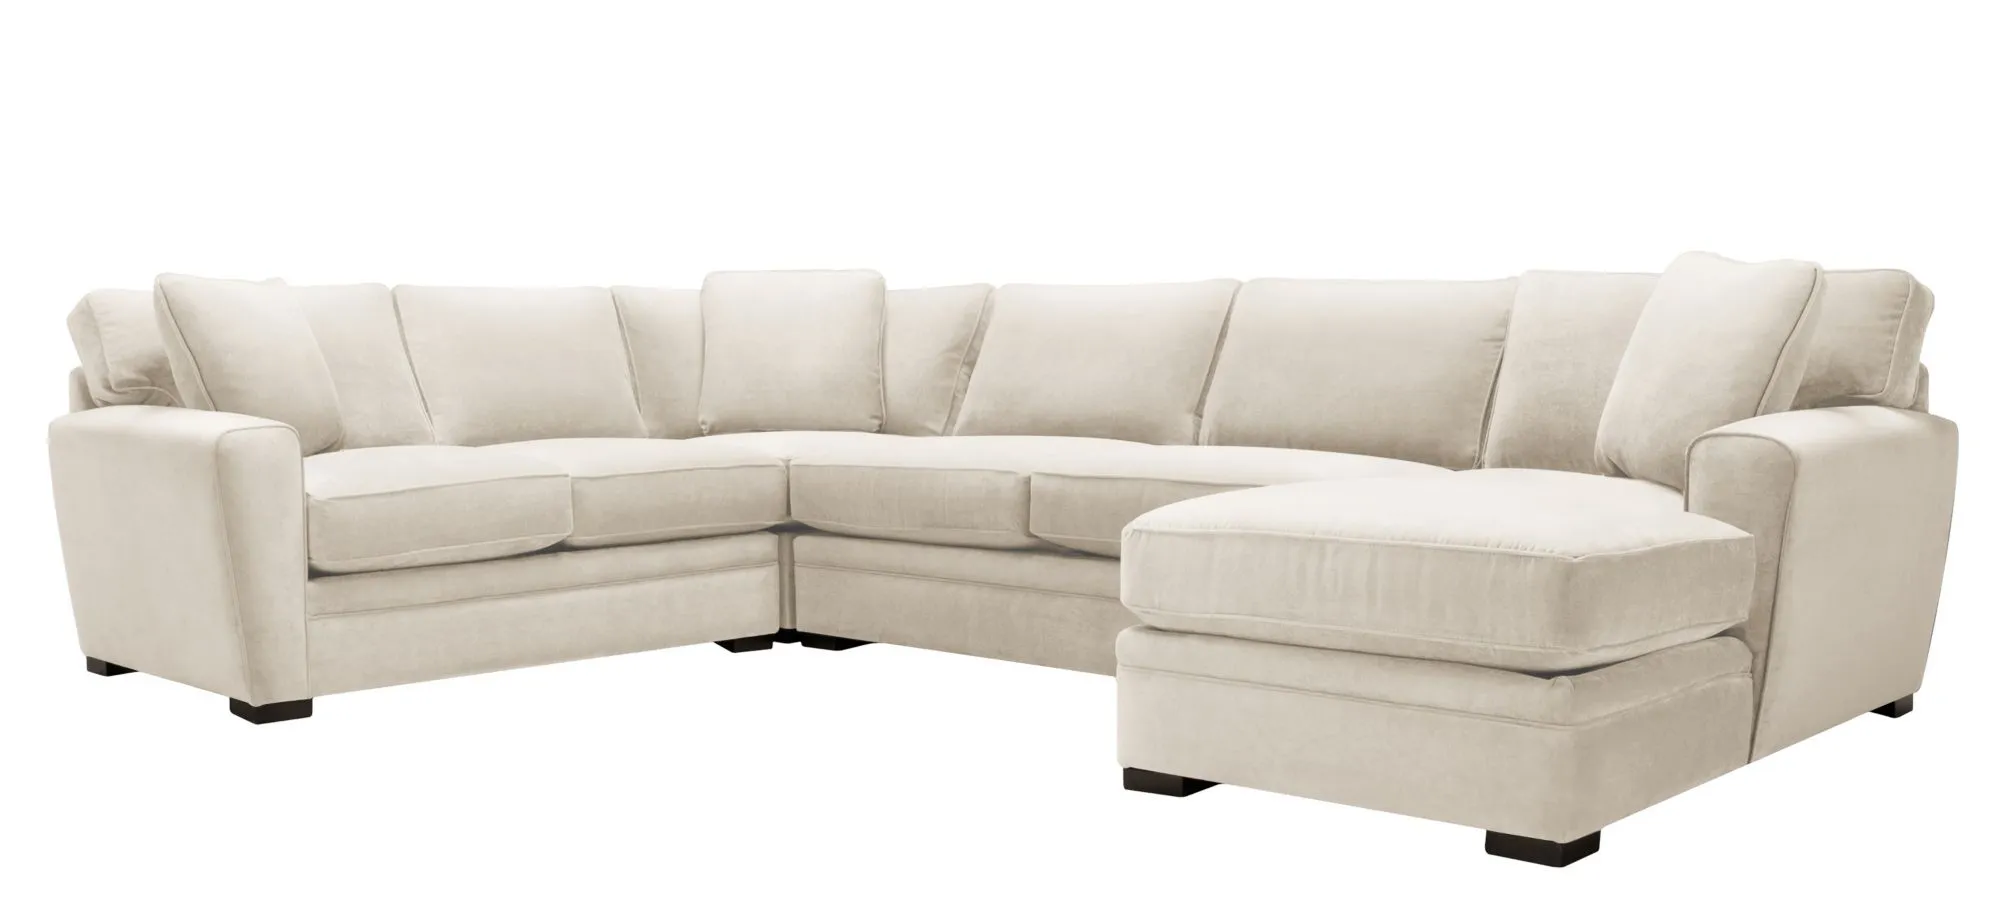 Artemis II 4-pc. Right Hand Facing Sectional Sofa in Gypsy Cream by Jonathan Louis